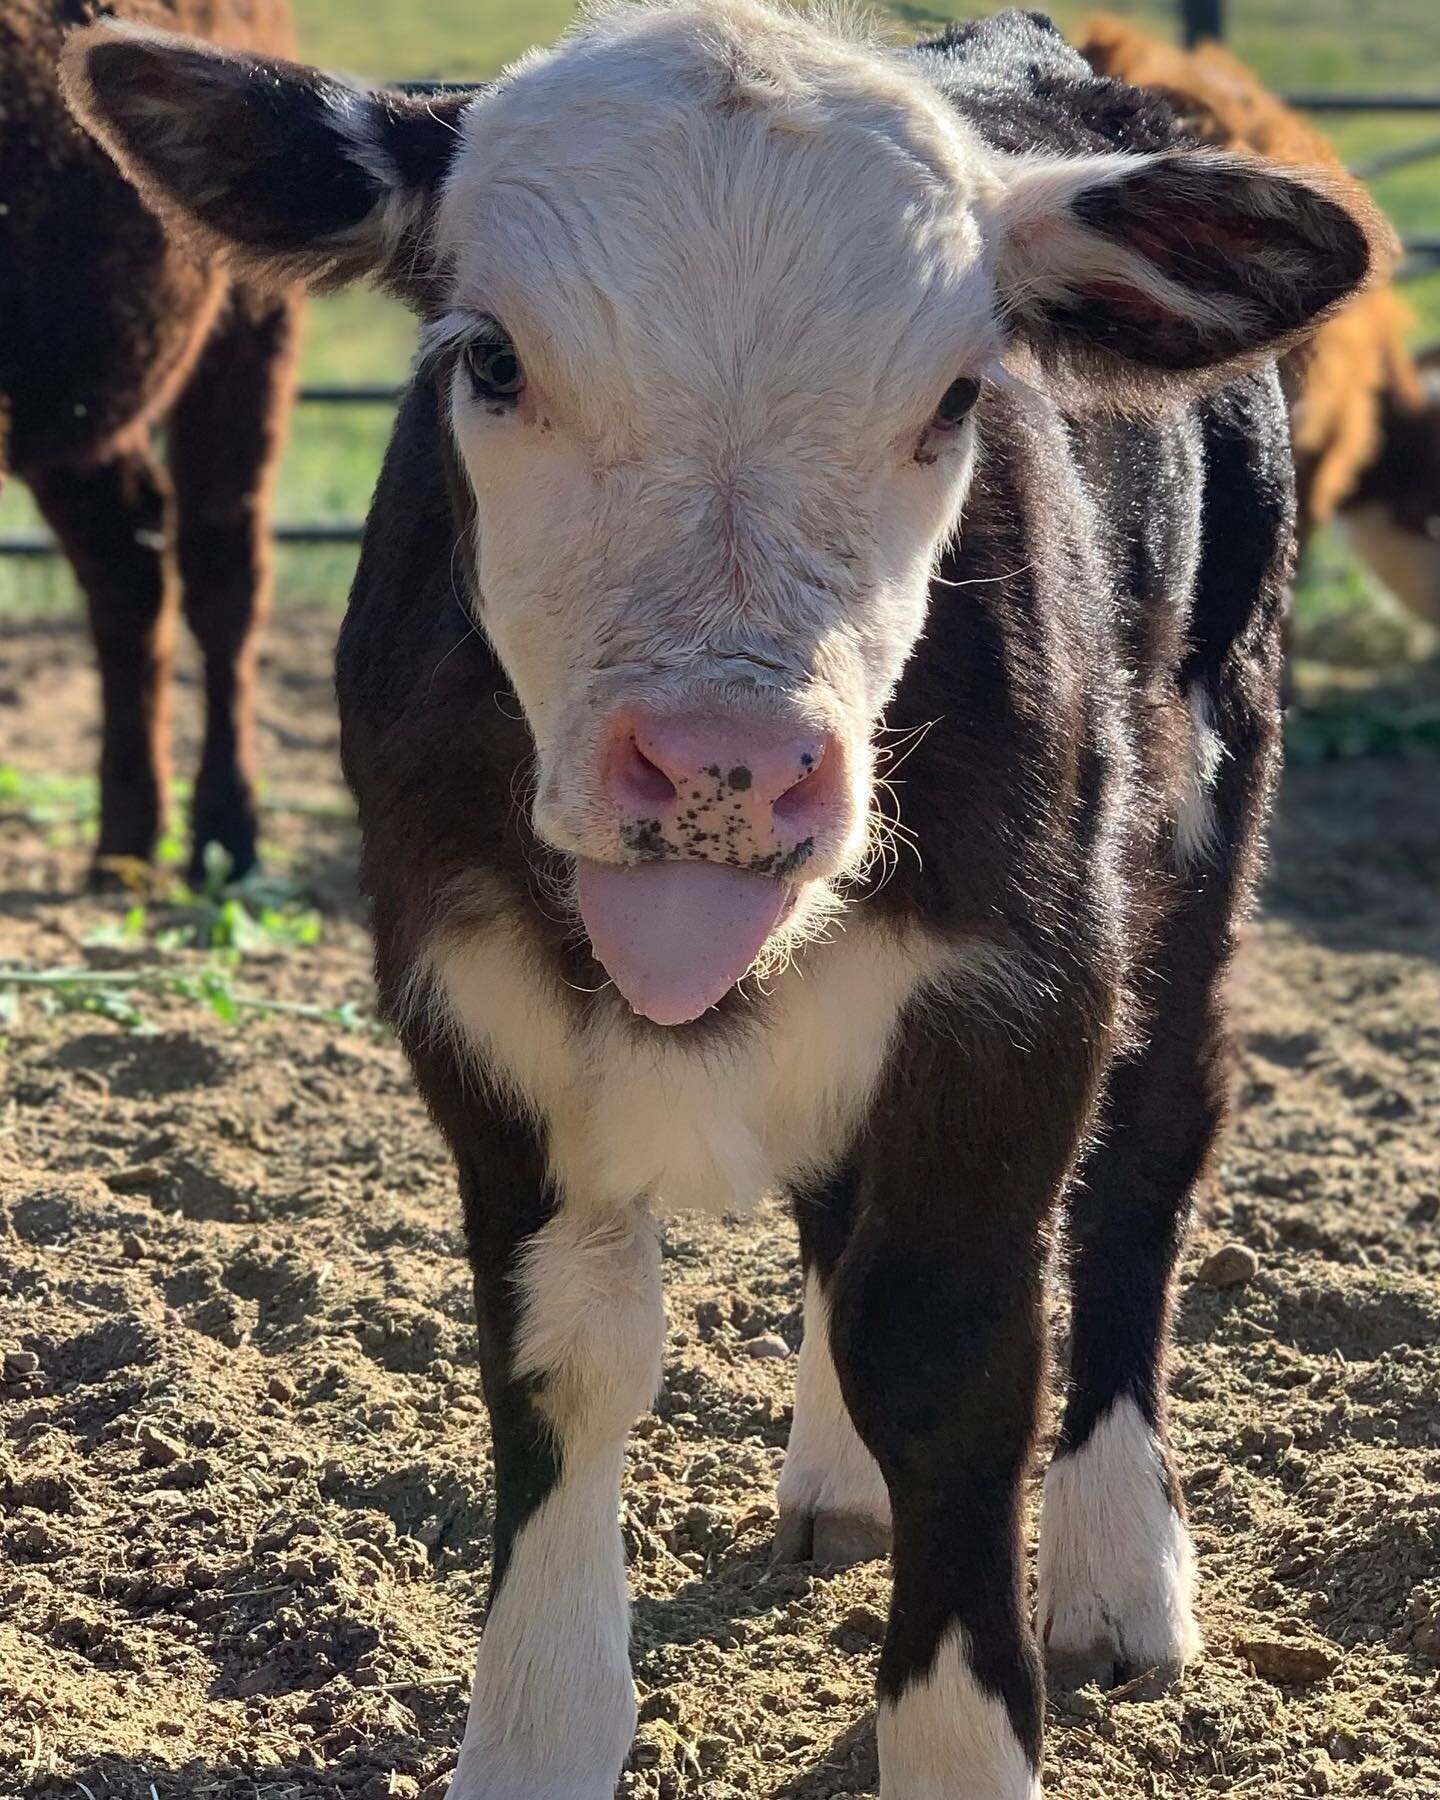 Heading into the weekend!!!!🥰🥳🐮 
Your support will Help Us Corral Poverty One Head at a Time! Steerdup.org  #Steerdup #Cattle #Lowline #Herefords #Angus #Beef #Cattle #RaisingBeefForFood #FeedTheHomeless